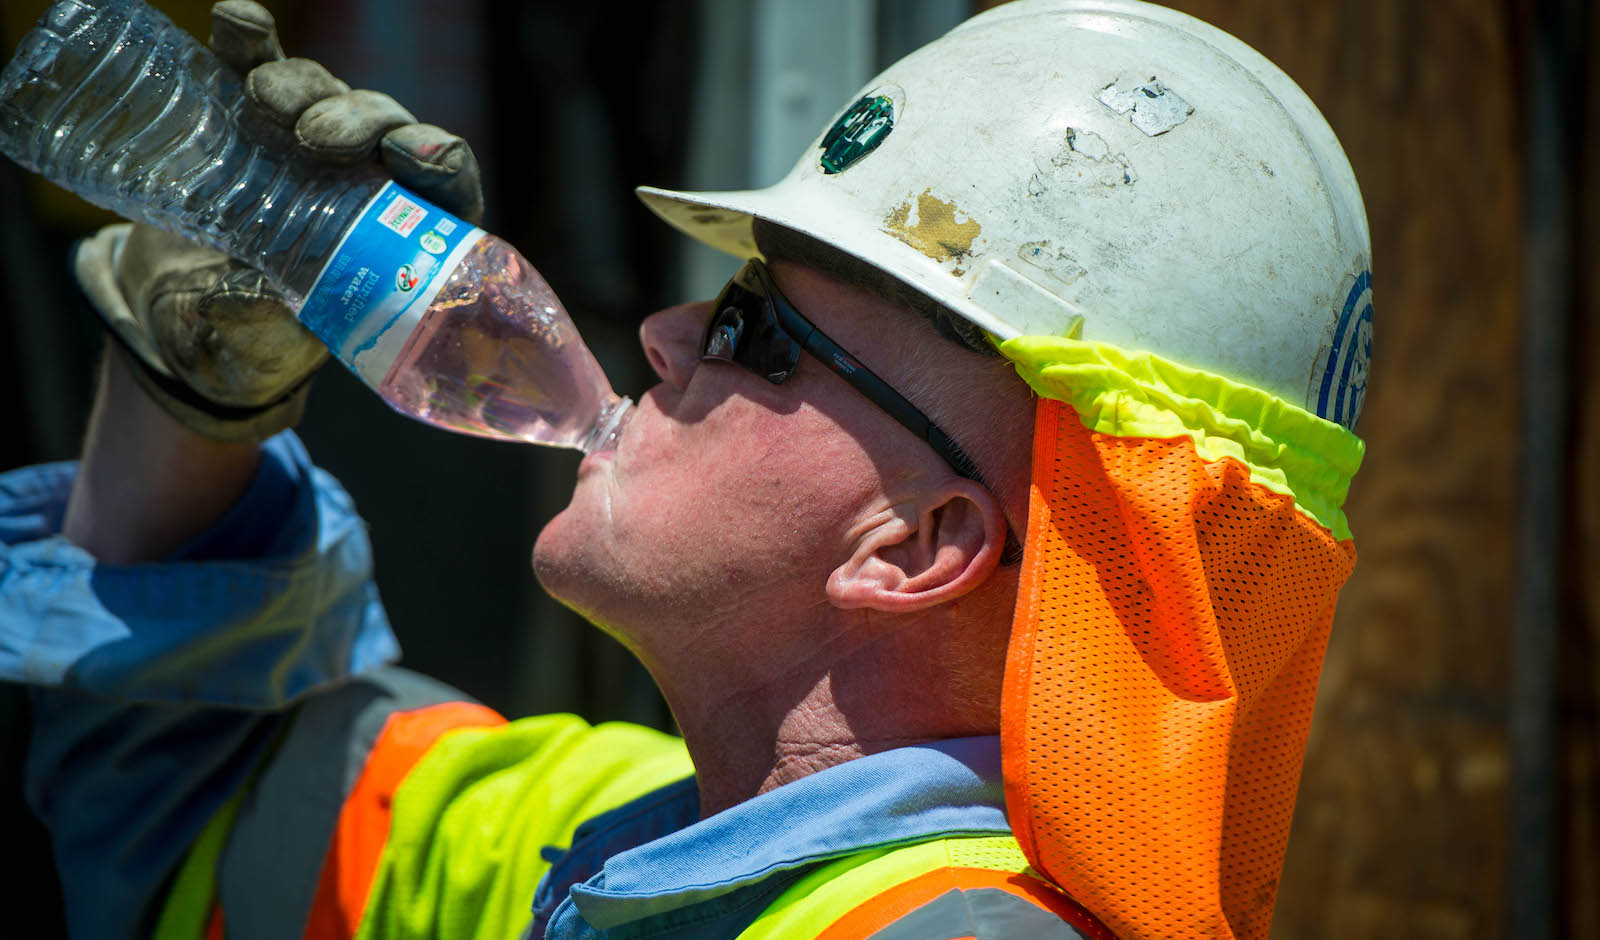 Construction worker takes a drink of water on a hot day